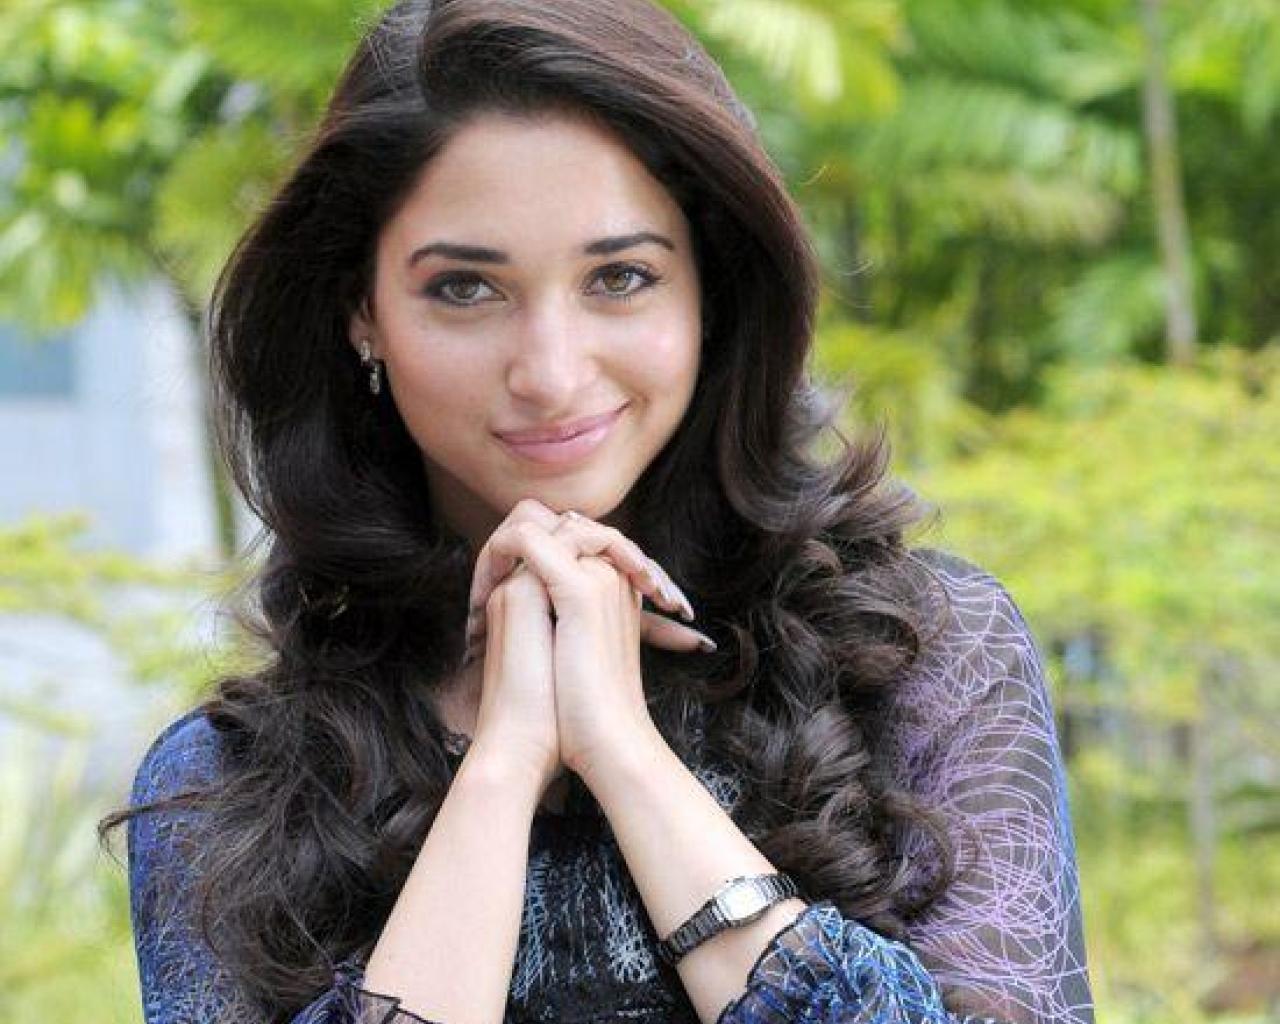 Beautiful And Sexy South Indian Actress Tamanna Bhatia Wrapped In Towel  Photos 08 (139764) | Kollywood Zone